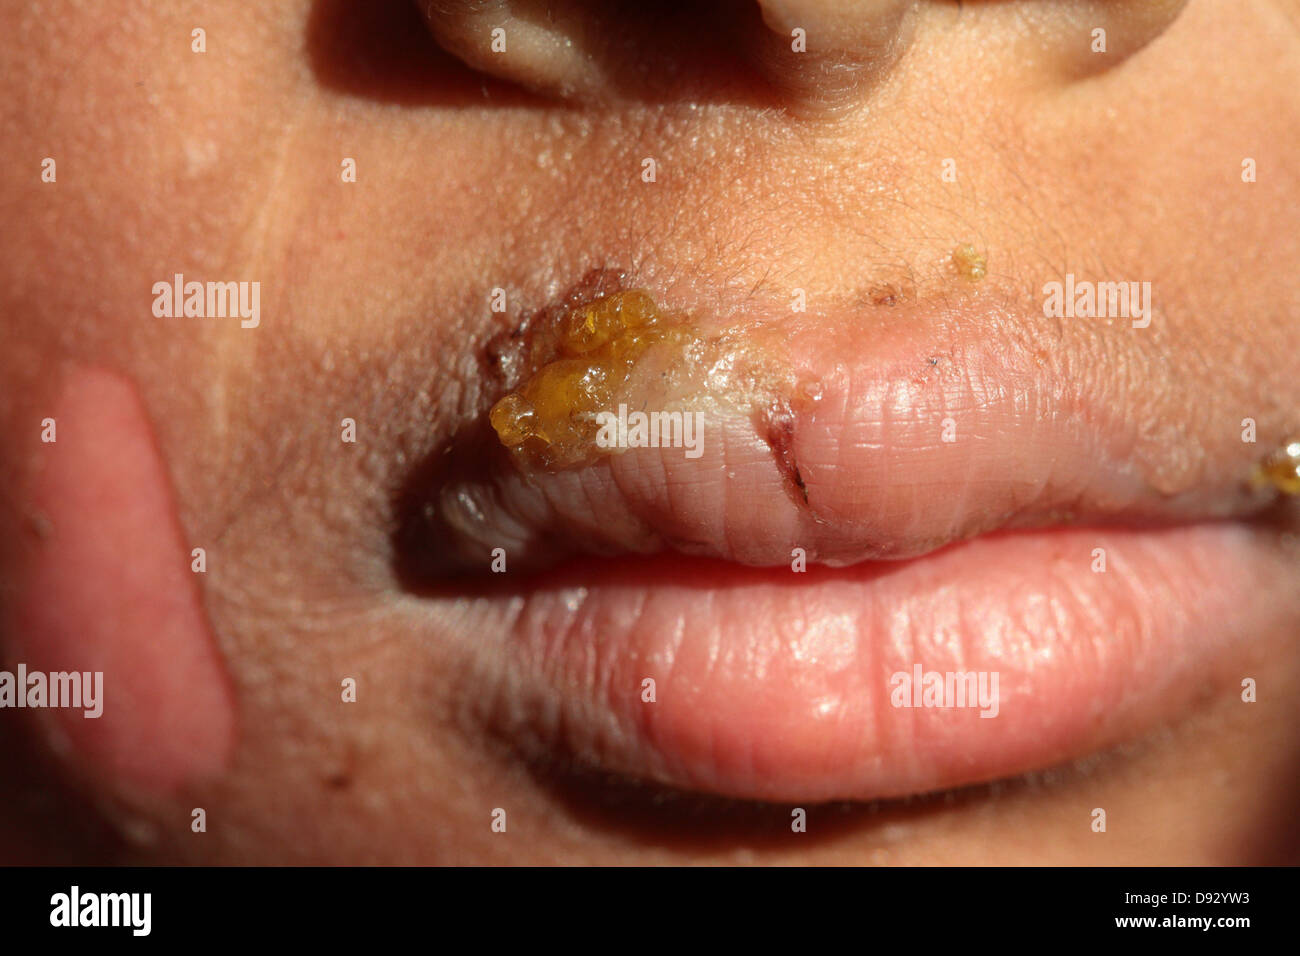 First and mild second degree facial liquid burn injury in a child caused by hot milk boiling over Stock Photo